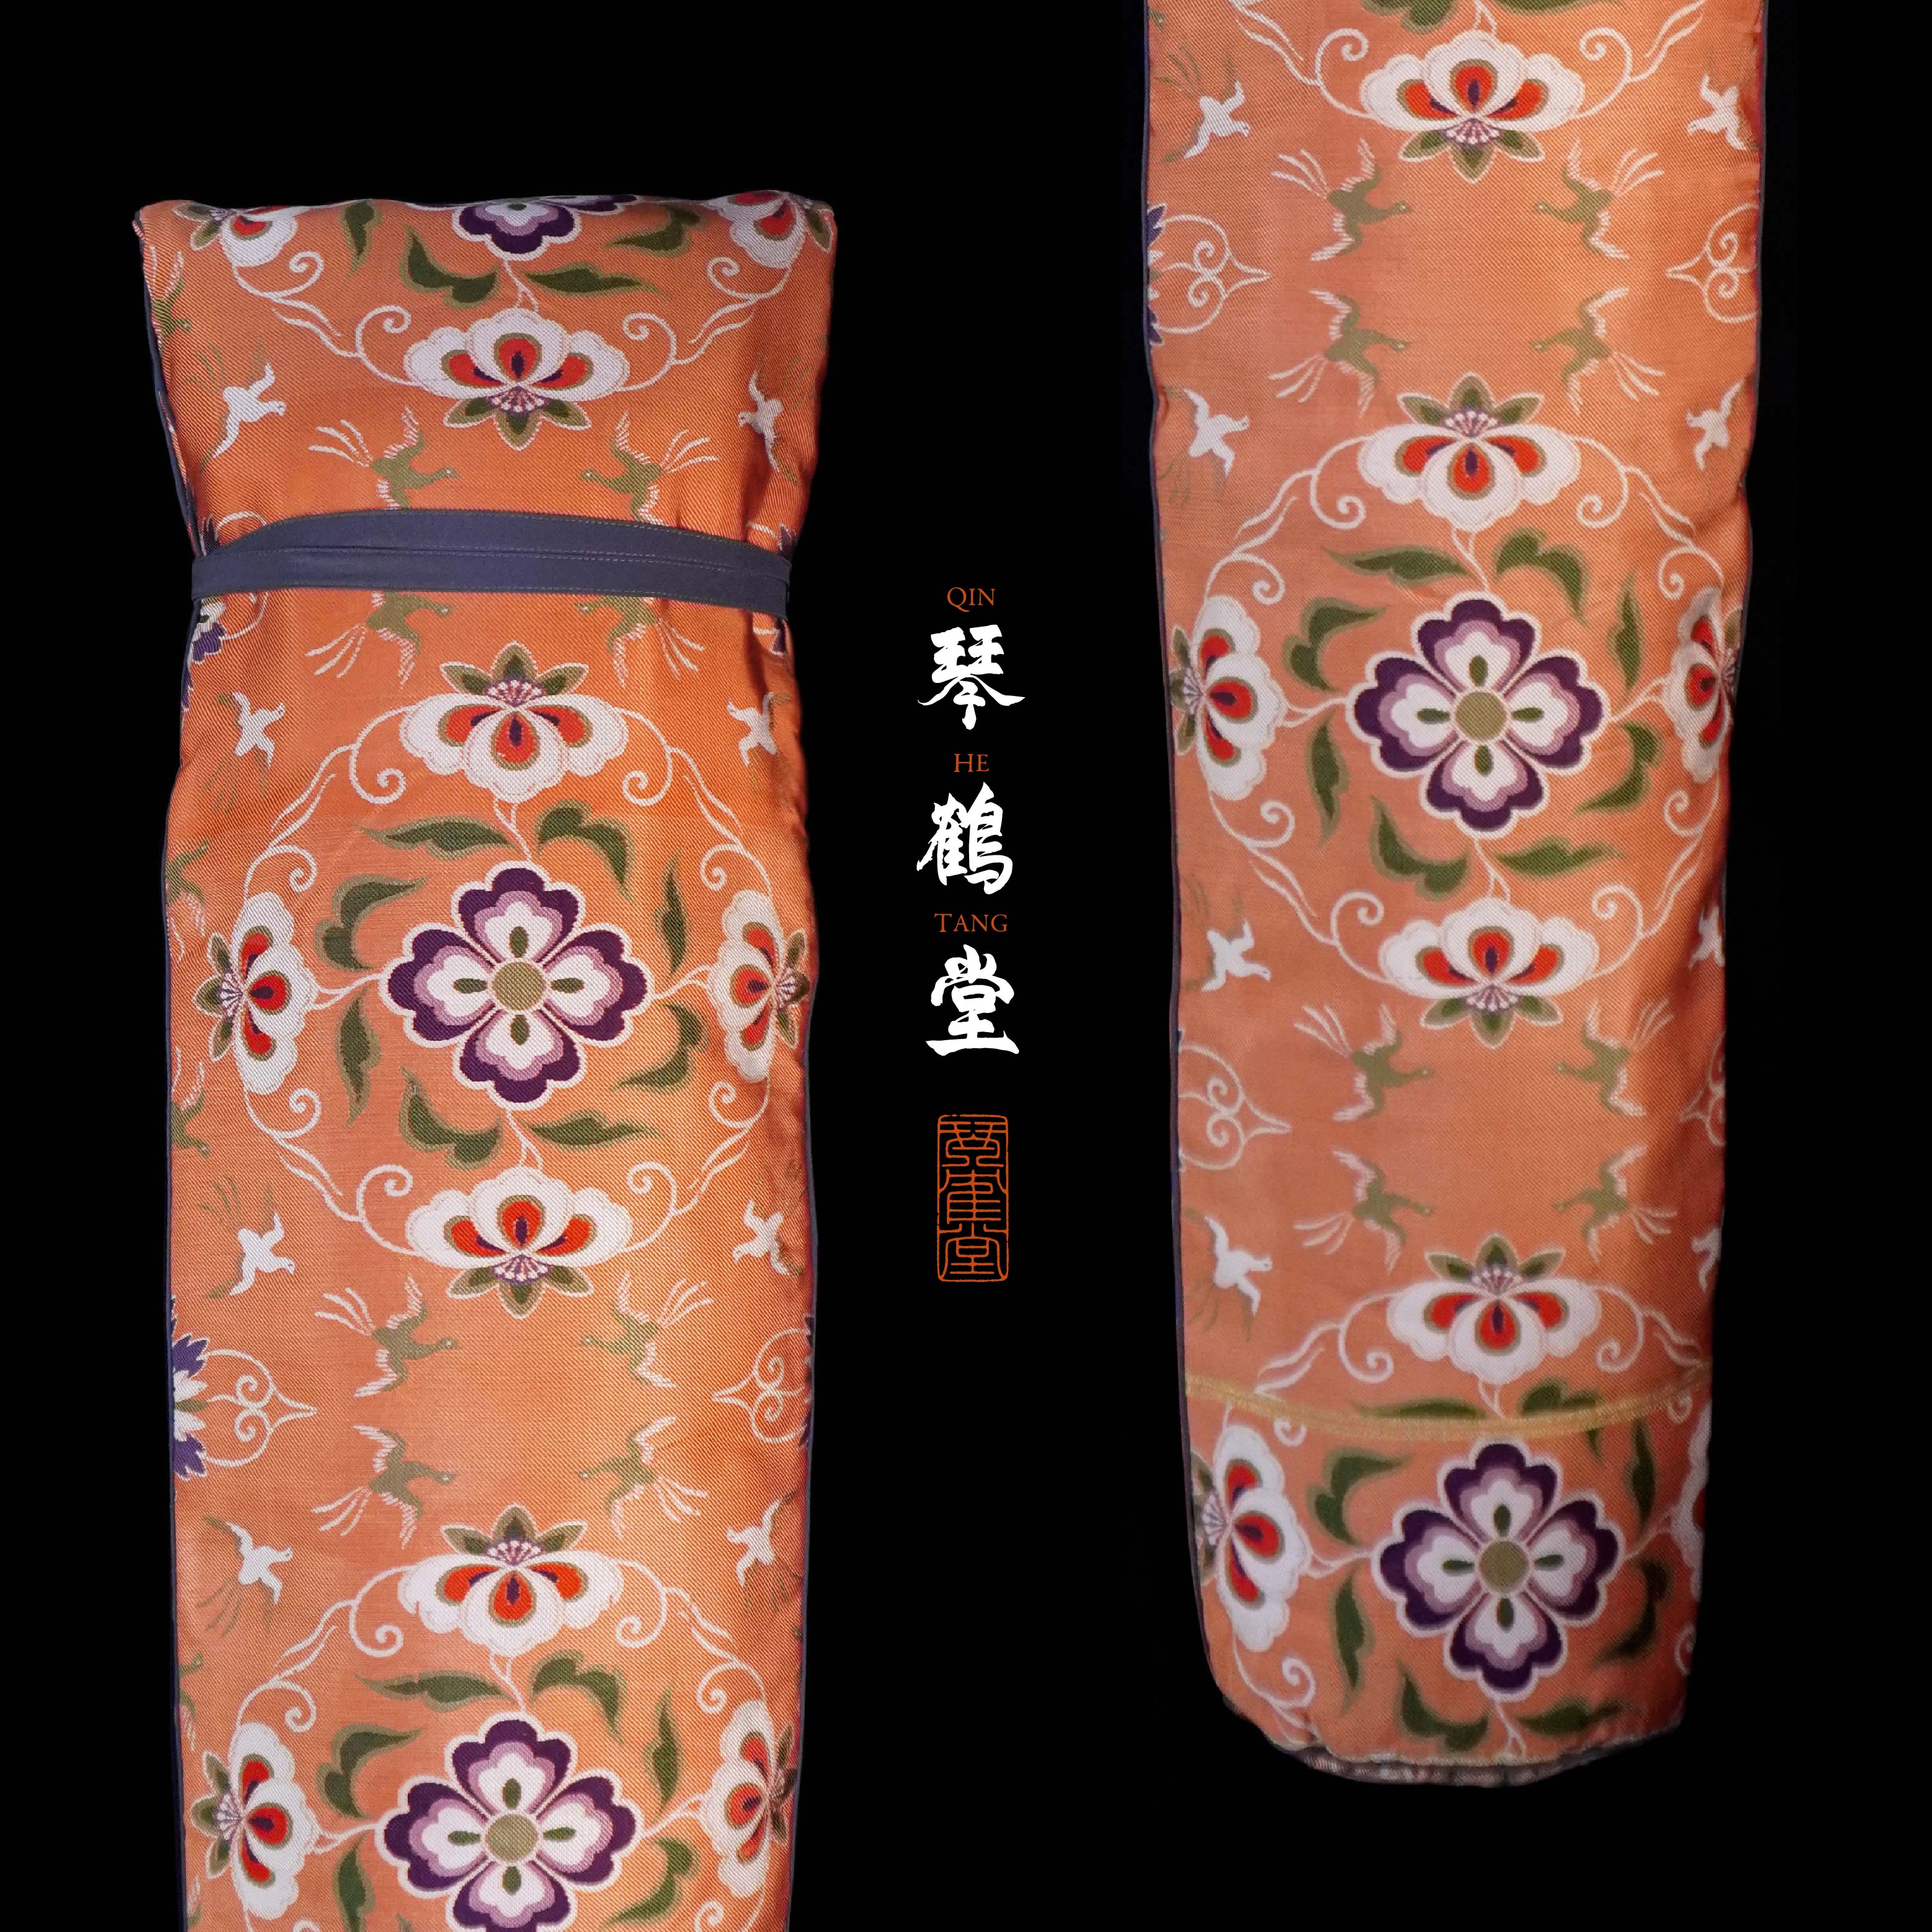 EverGlow" - Luxurious Chinese Qin Case with Thick Brocade Fabric and Handcrafted Finery for Traditional Musical Instrument